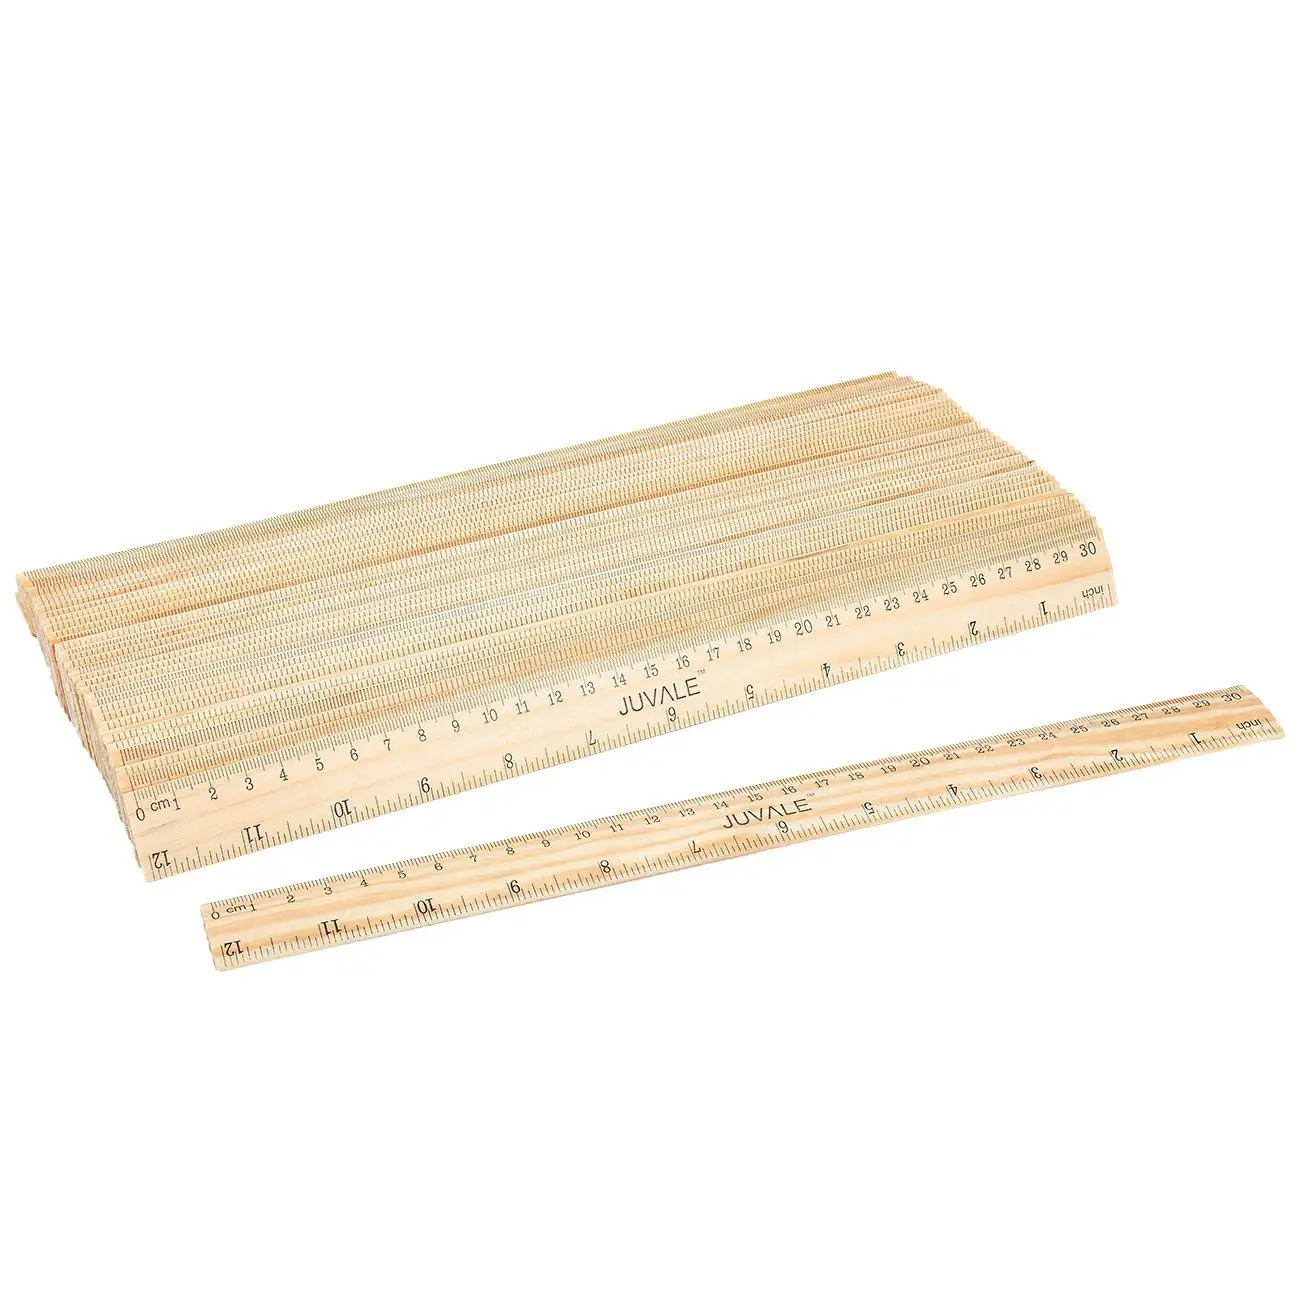 6 in, 5 color, 50 Pack Juvale Classroom Transparent Rulers Set